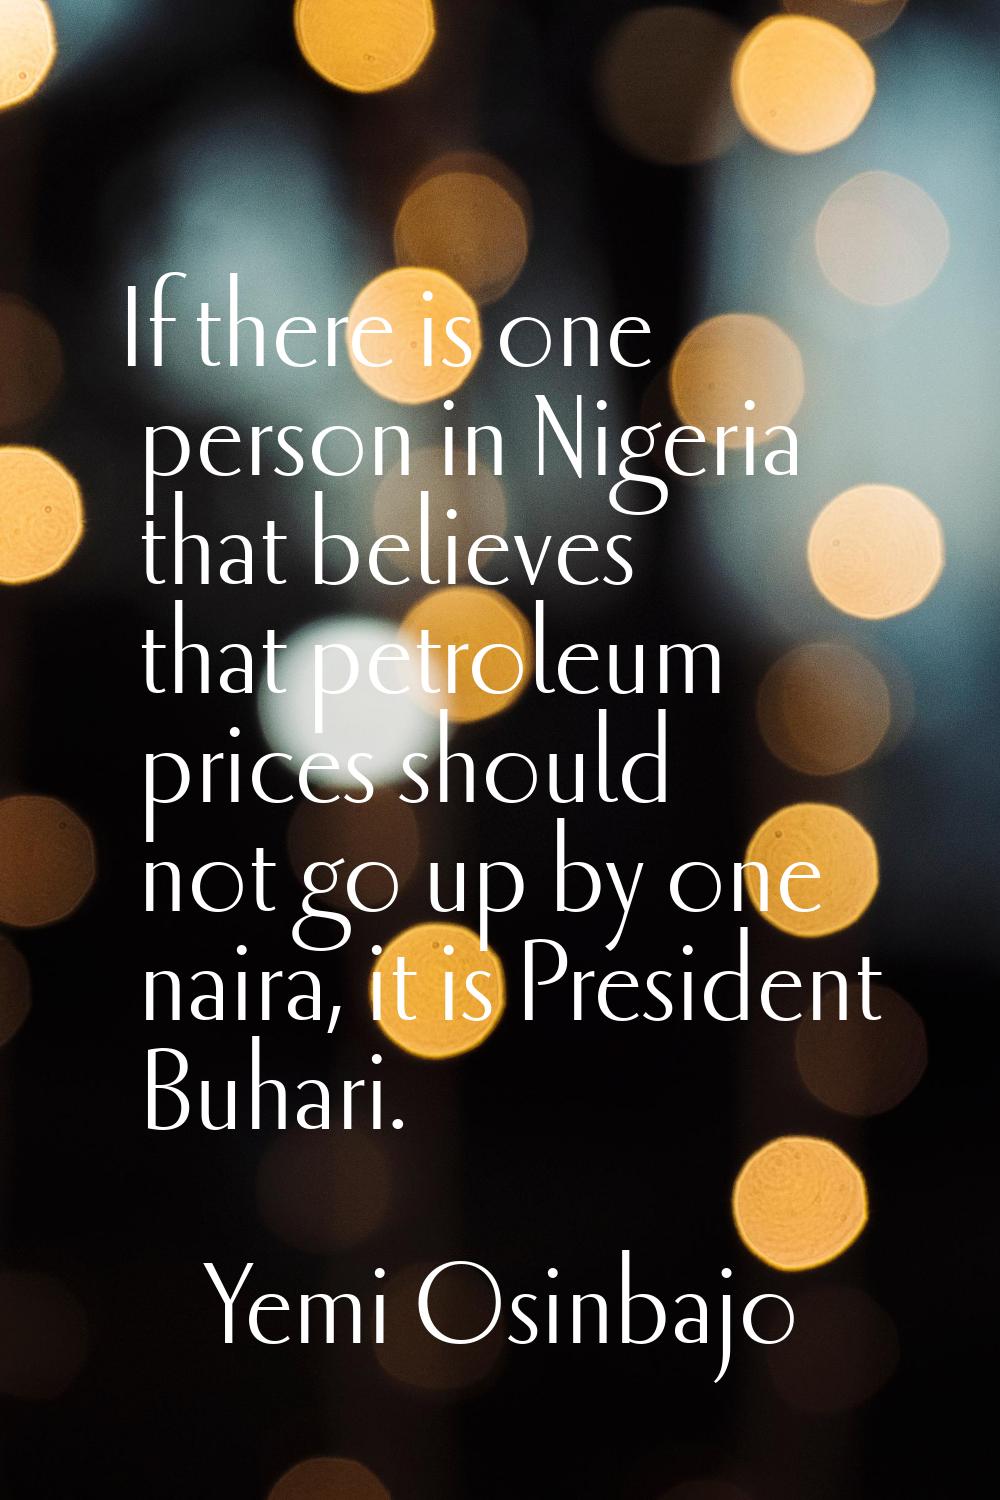 If there is one person in Nigeria that believes that petroleum prices should not go up by one naira